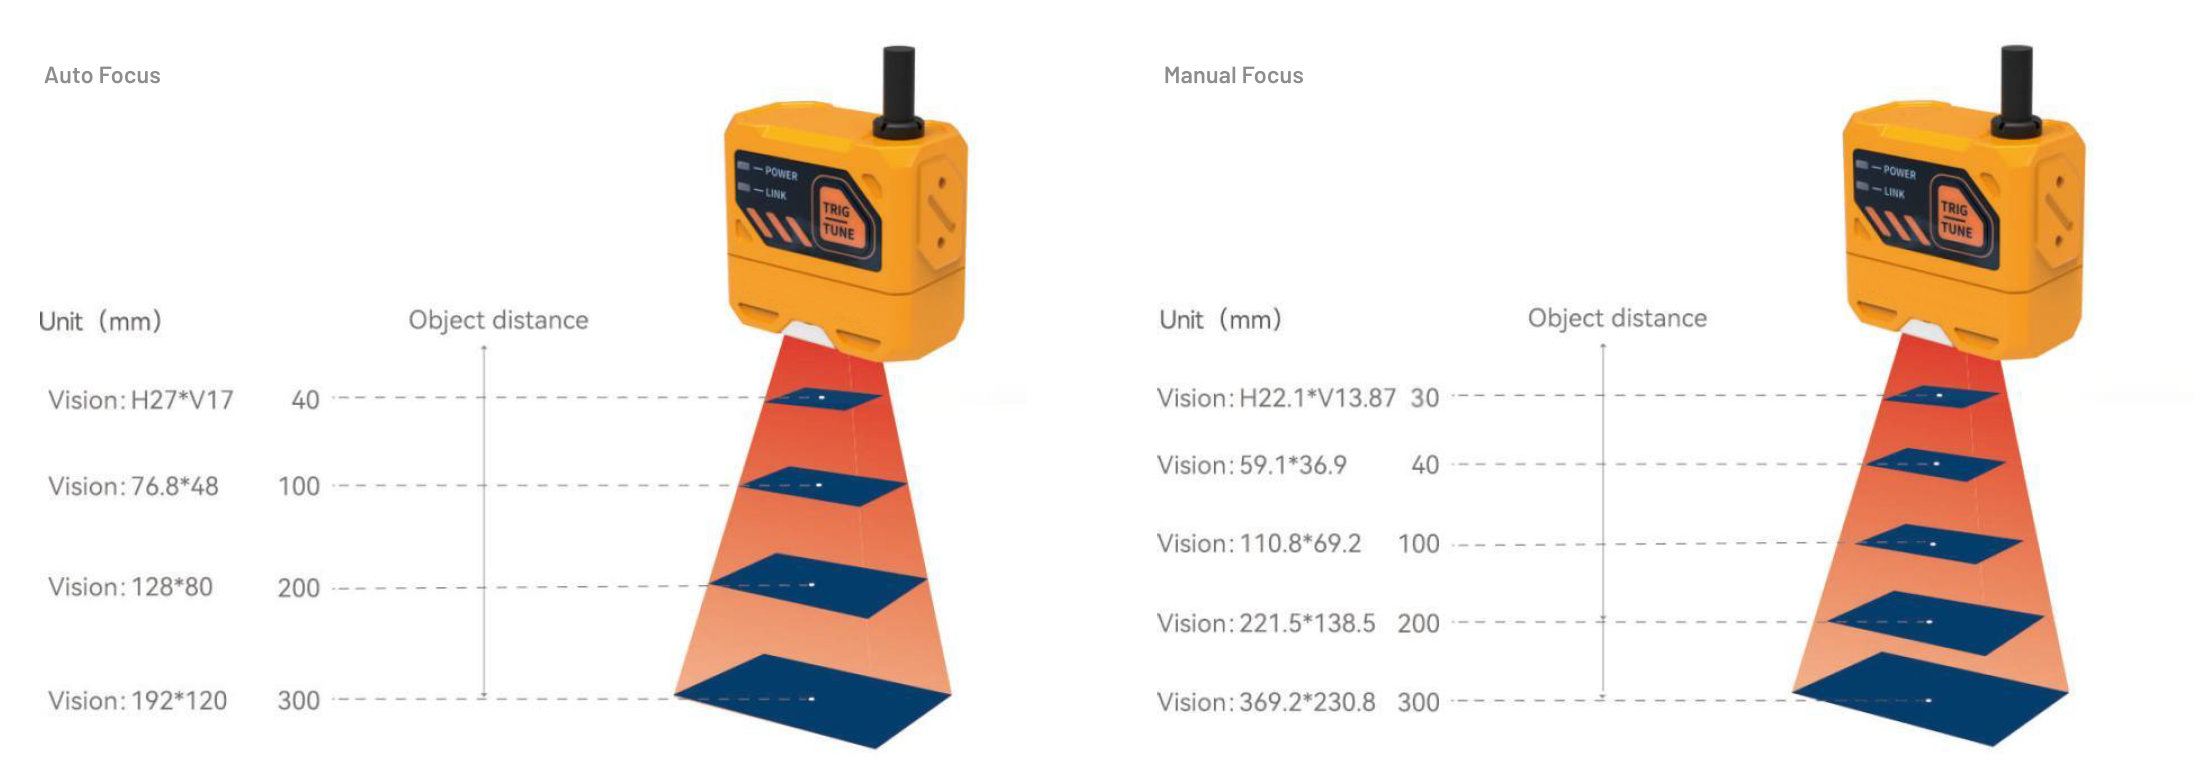 INDUSTRIAL BARCODE SCANNER RCD SERIES FIELD OF VIEW